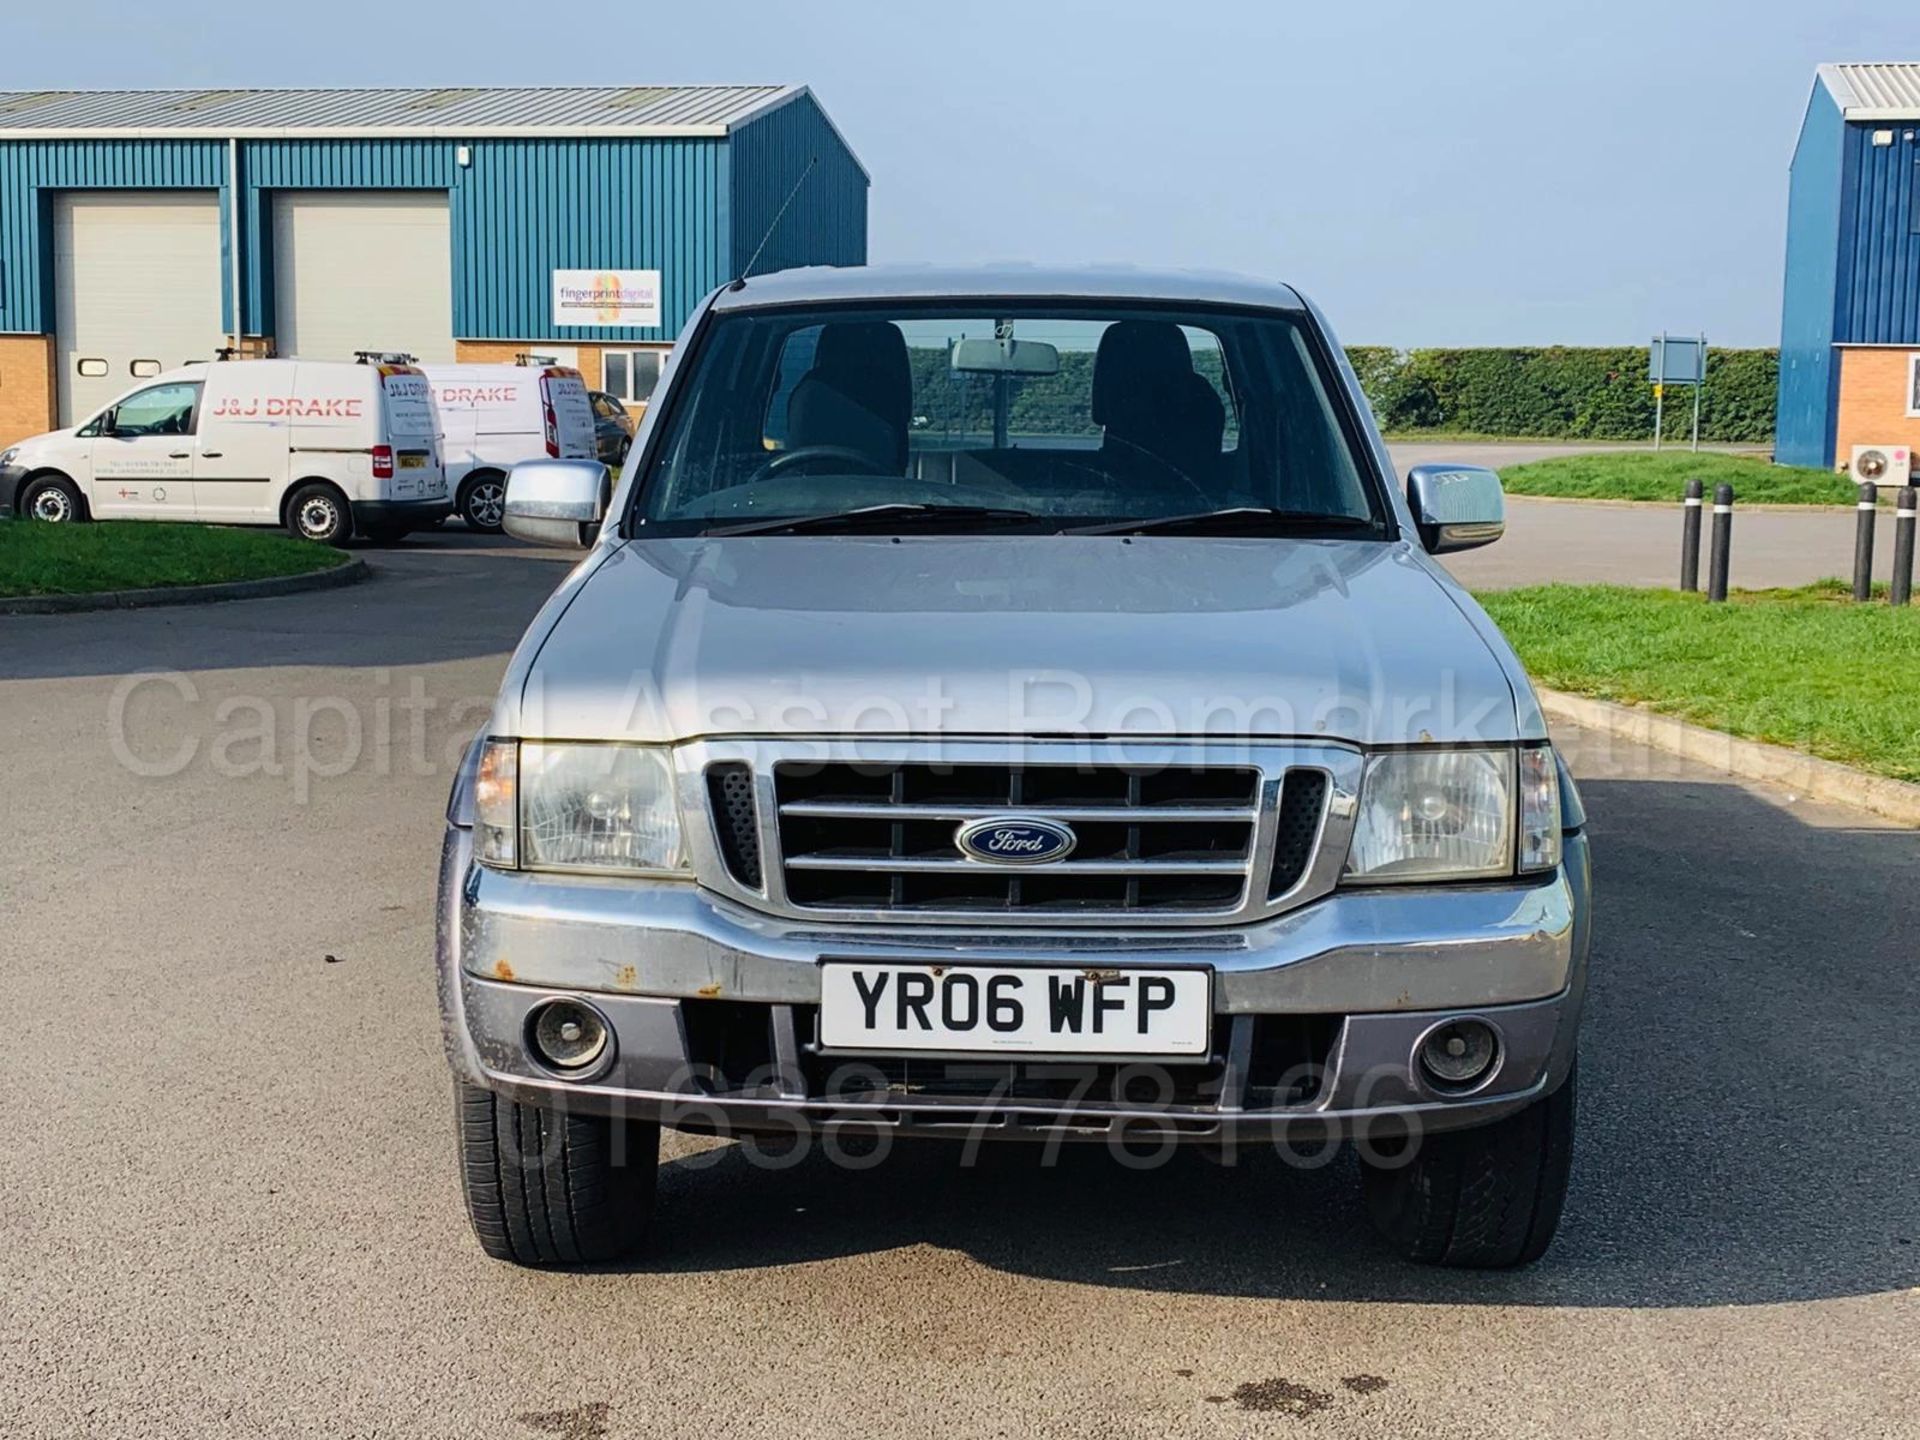 (ON SALE) FORD RANGER *XLT - THUNDER* D/CAB PICK-UP (2006) '2.5 DIESEL - 109 BHP' *AIR CON* (NO VAT) - Image 9 of 21